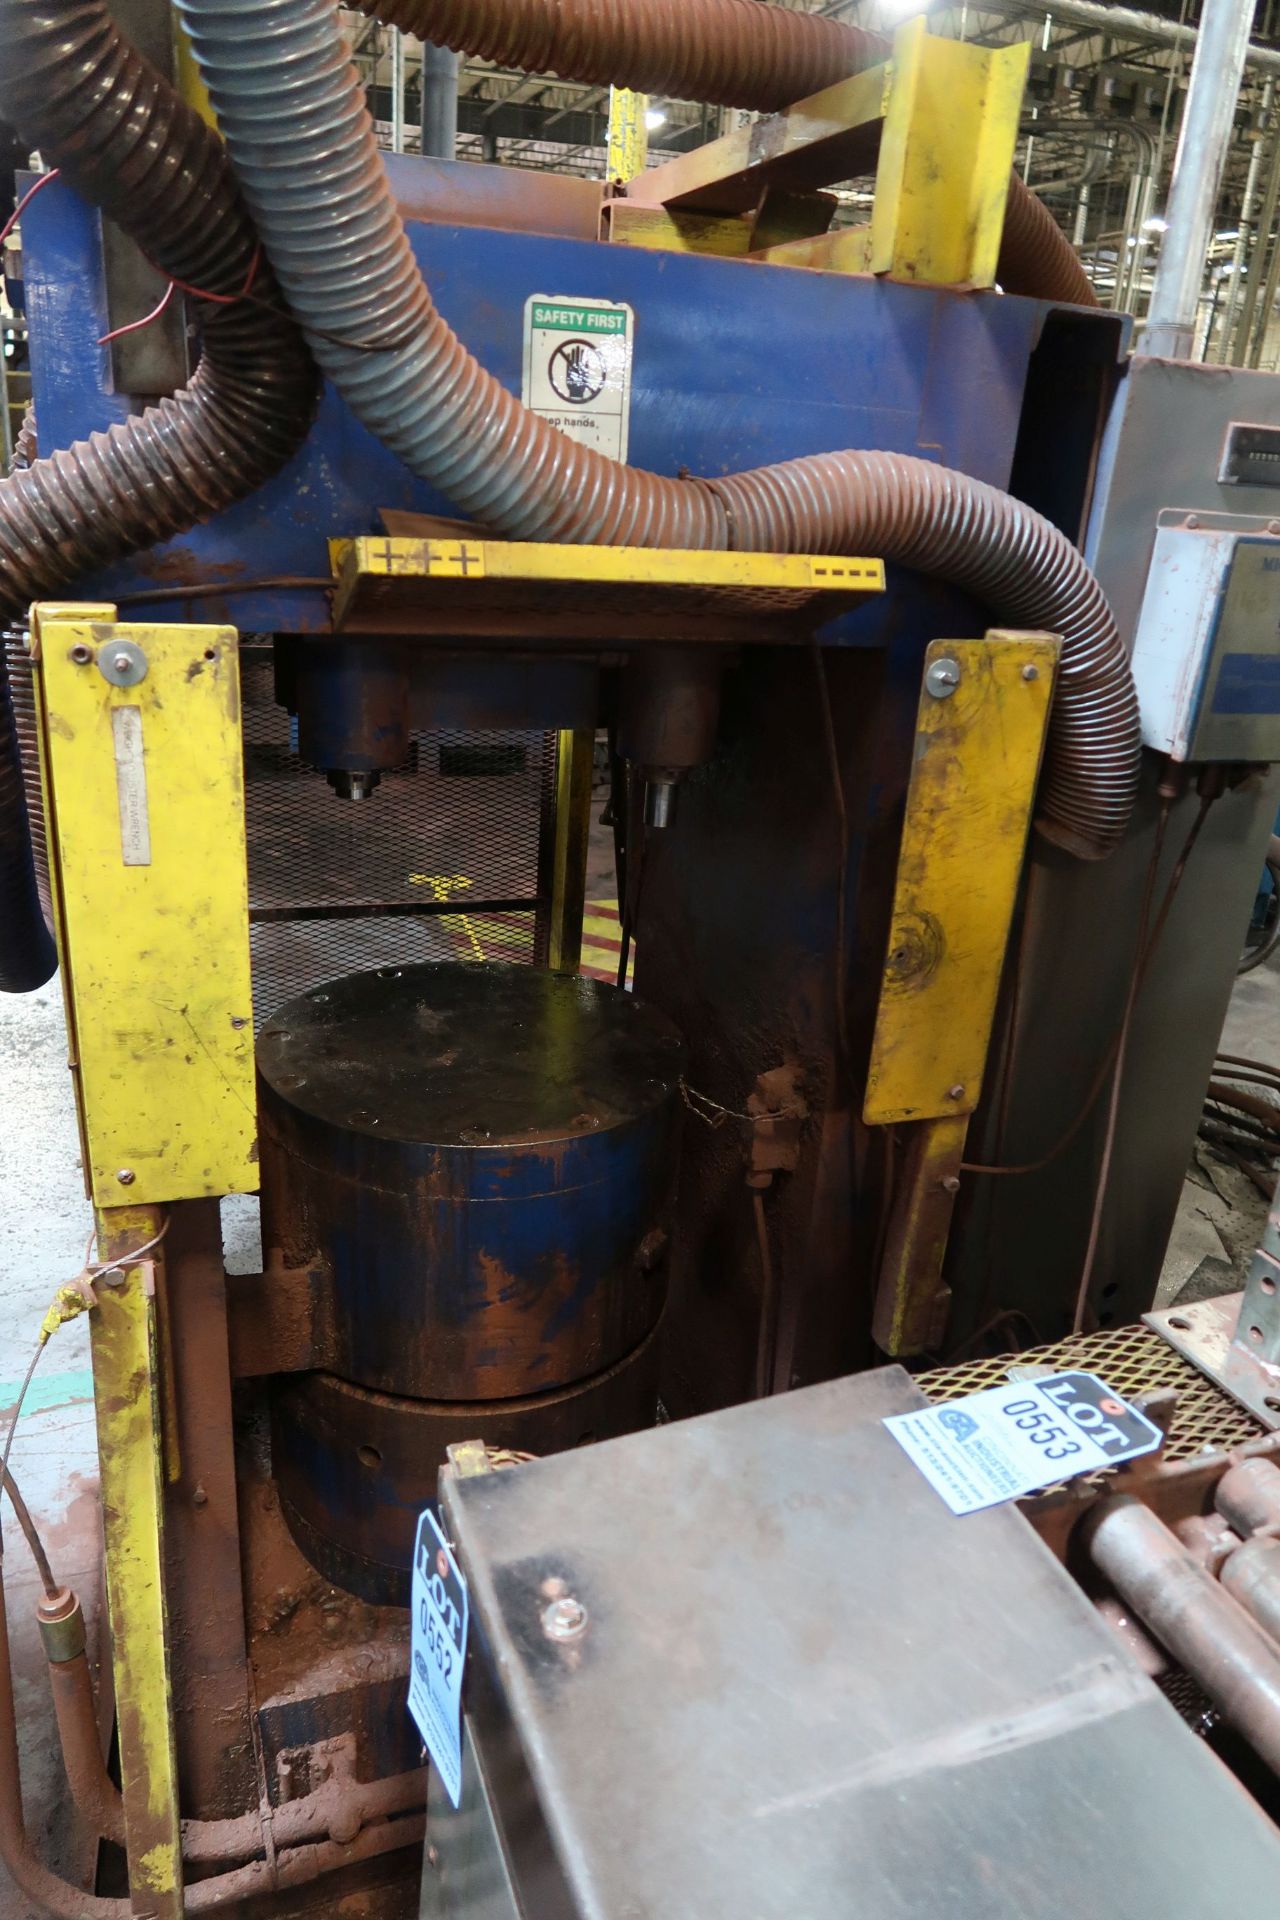 SHOP FABRICATED UP-ACTING MOLD PRESS **LOADING PRICE DUE TO ERRA - $1,675.00** - Image 5 of 6